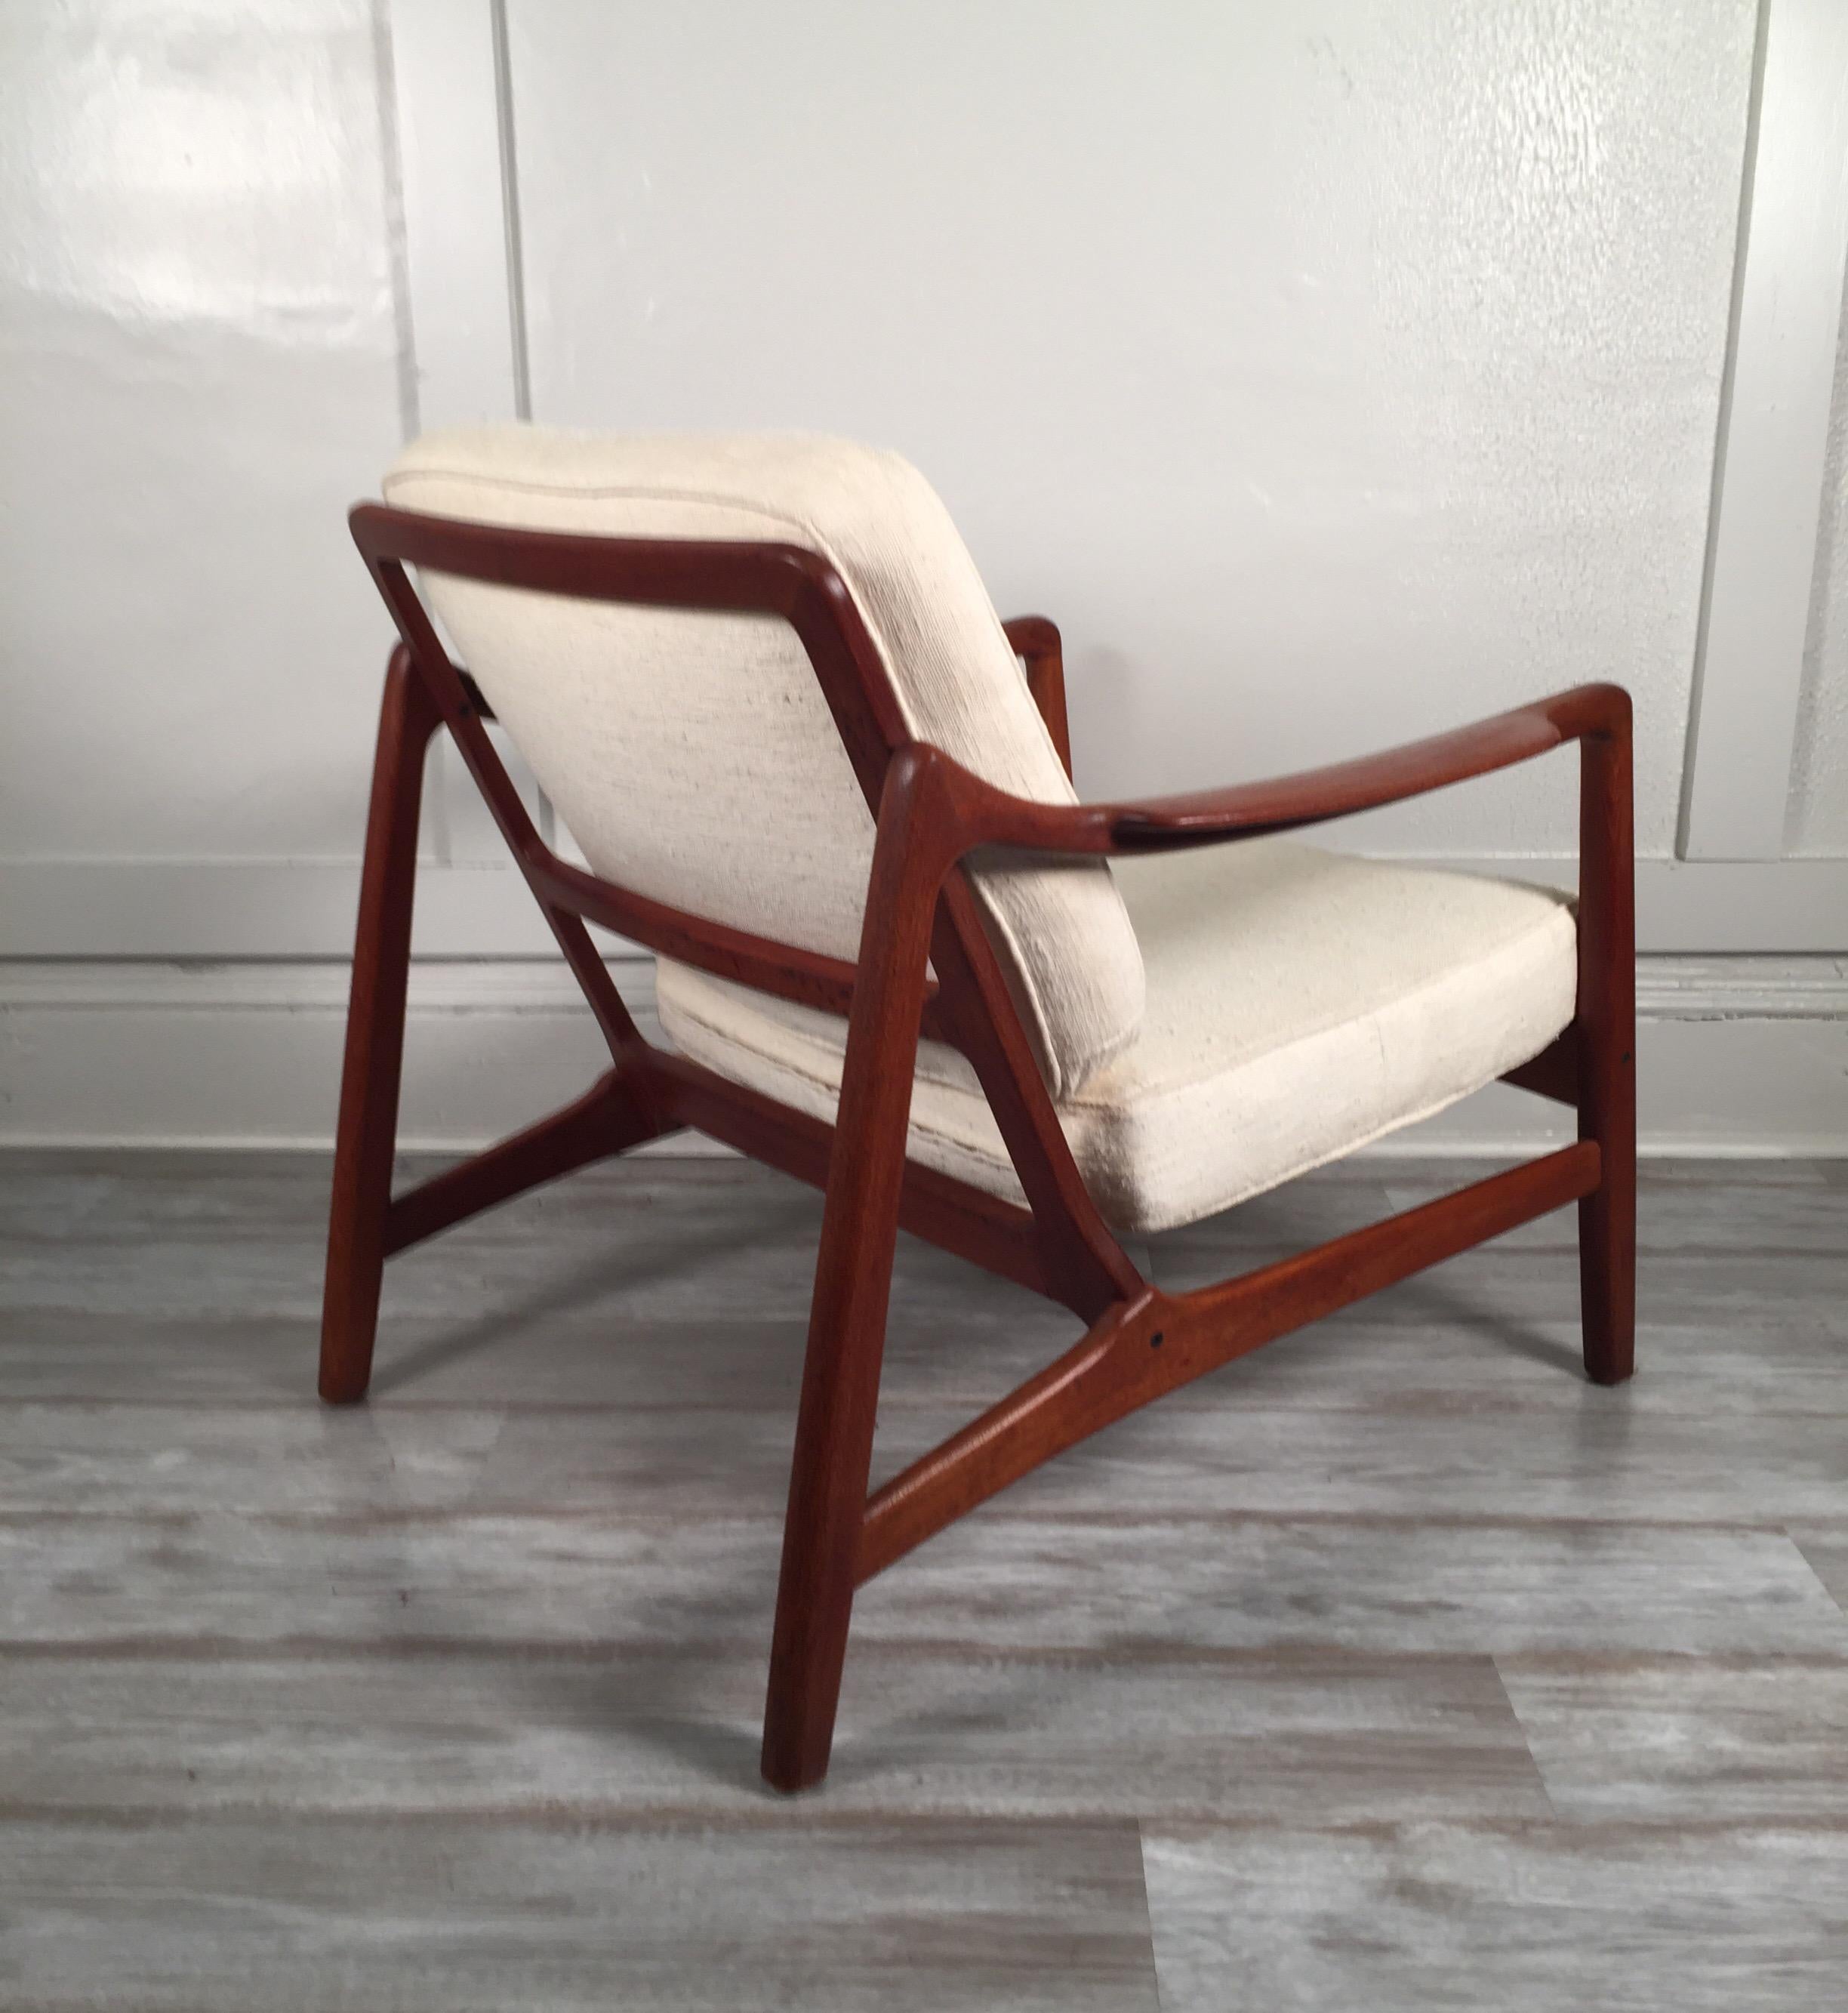 Mid-20th Century Lounge Chair by Tove and Edvard Kindt-Larsen